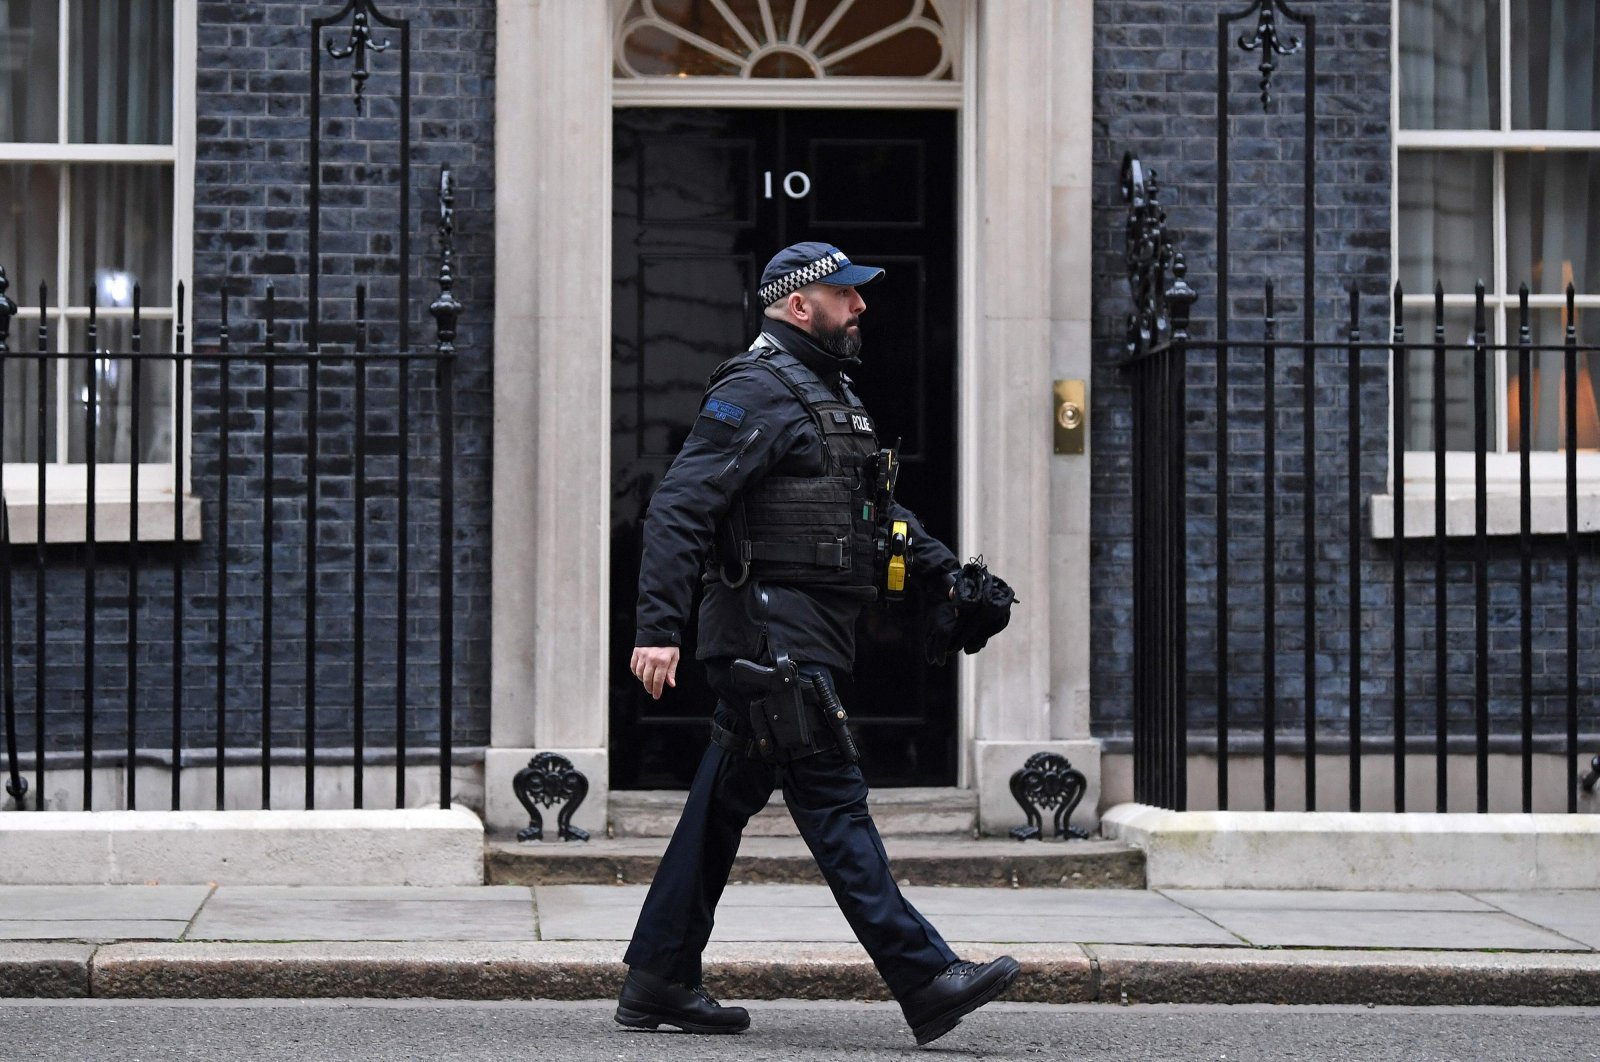 A police officer walks past the door to 10 Downing Street, the official residence of Britain&#039;s Prime Minister, in London, Britain, Jan. 25, 2022. (AFP Photo)